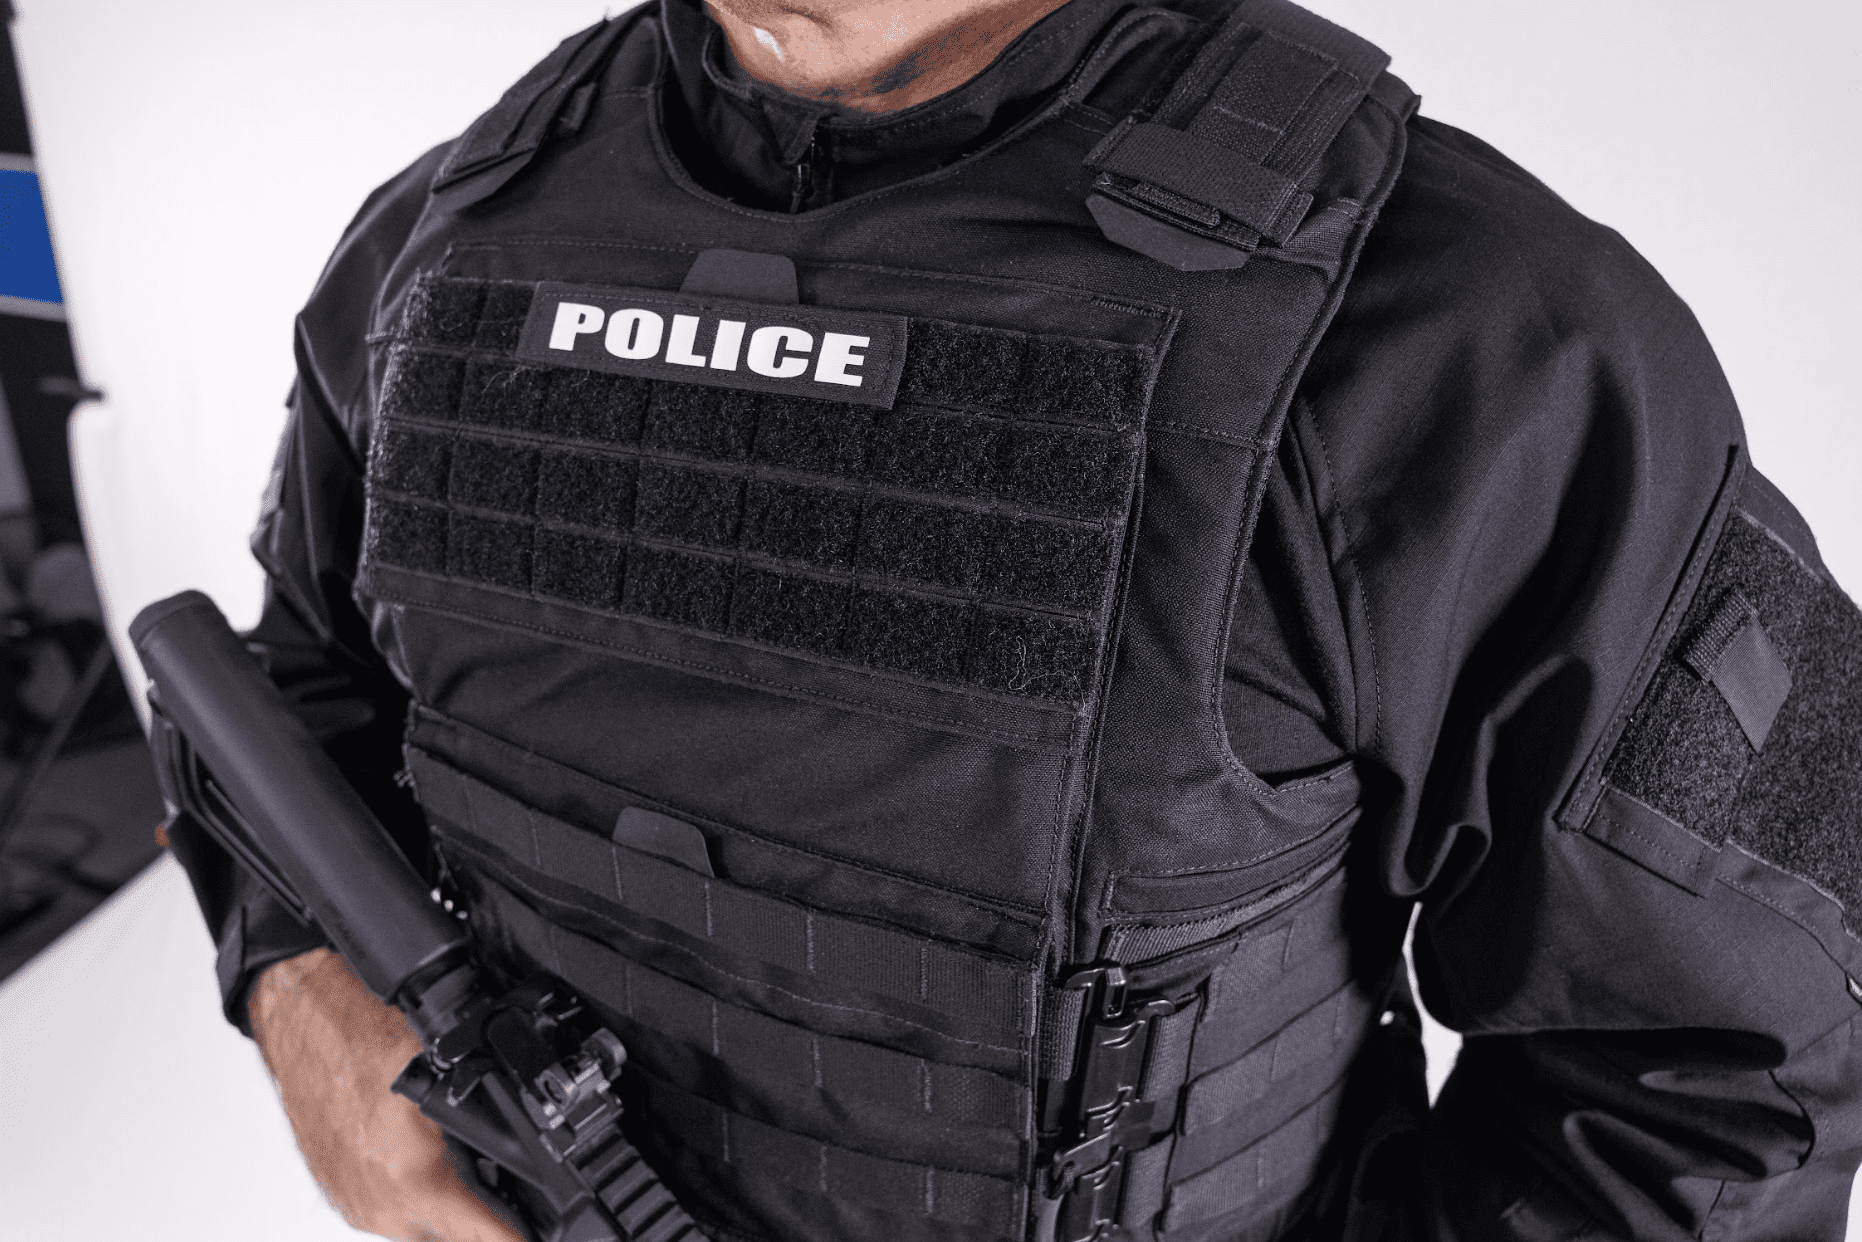 Guide to Ballistic Shields: [Design and Features]